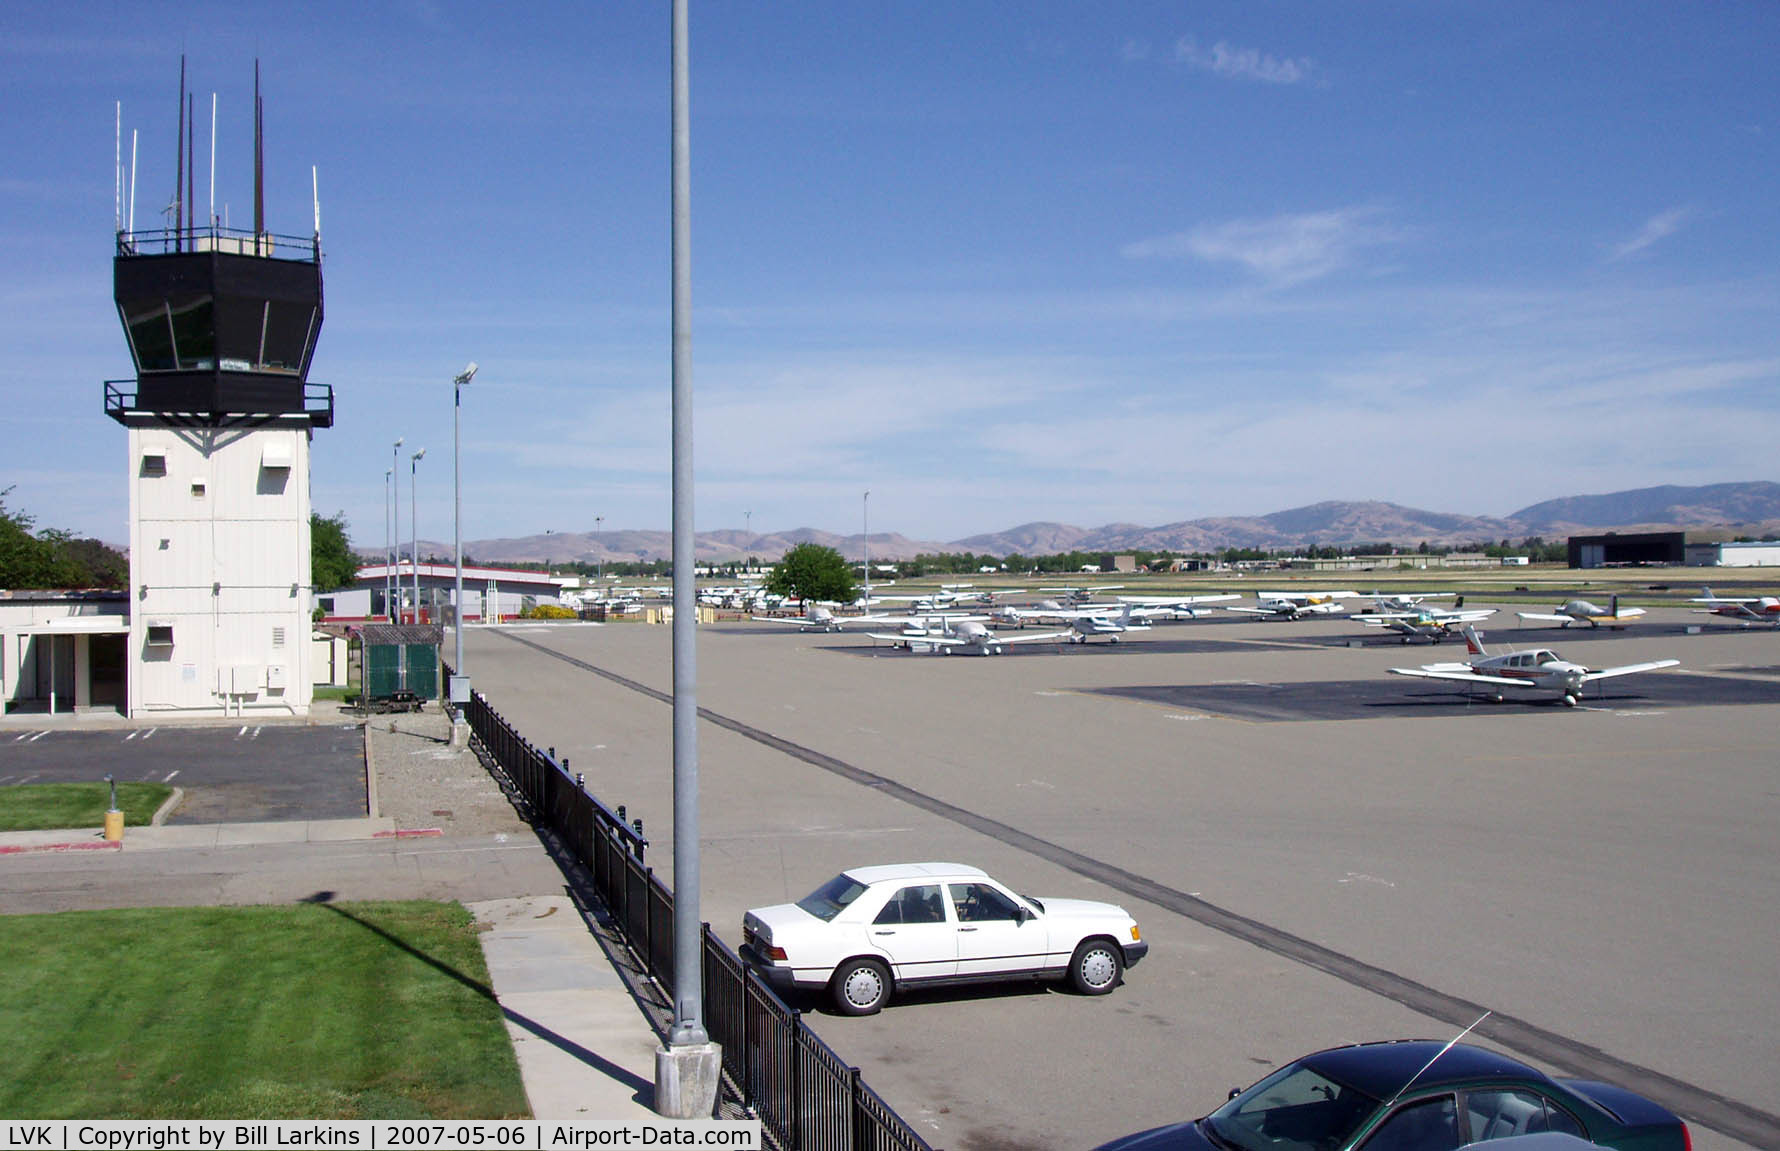 Livermore Municipal Airport (LVK) - Tower area.